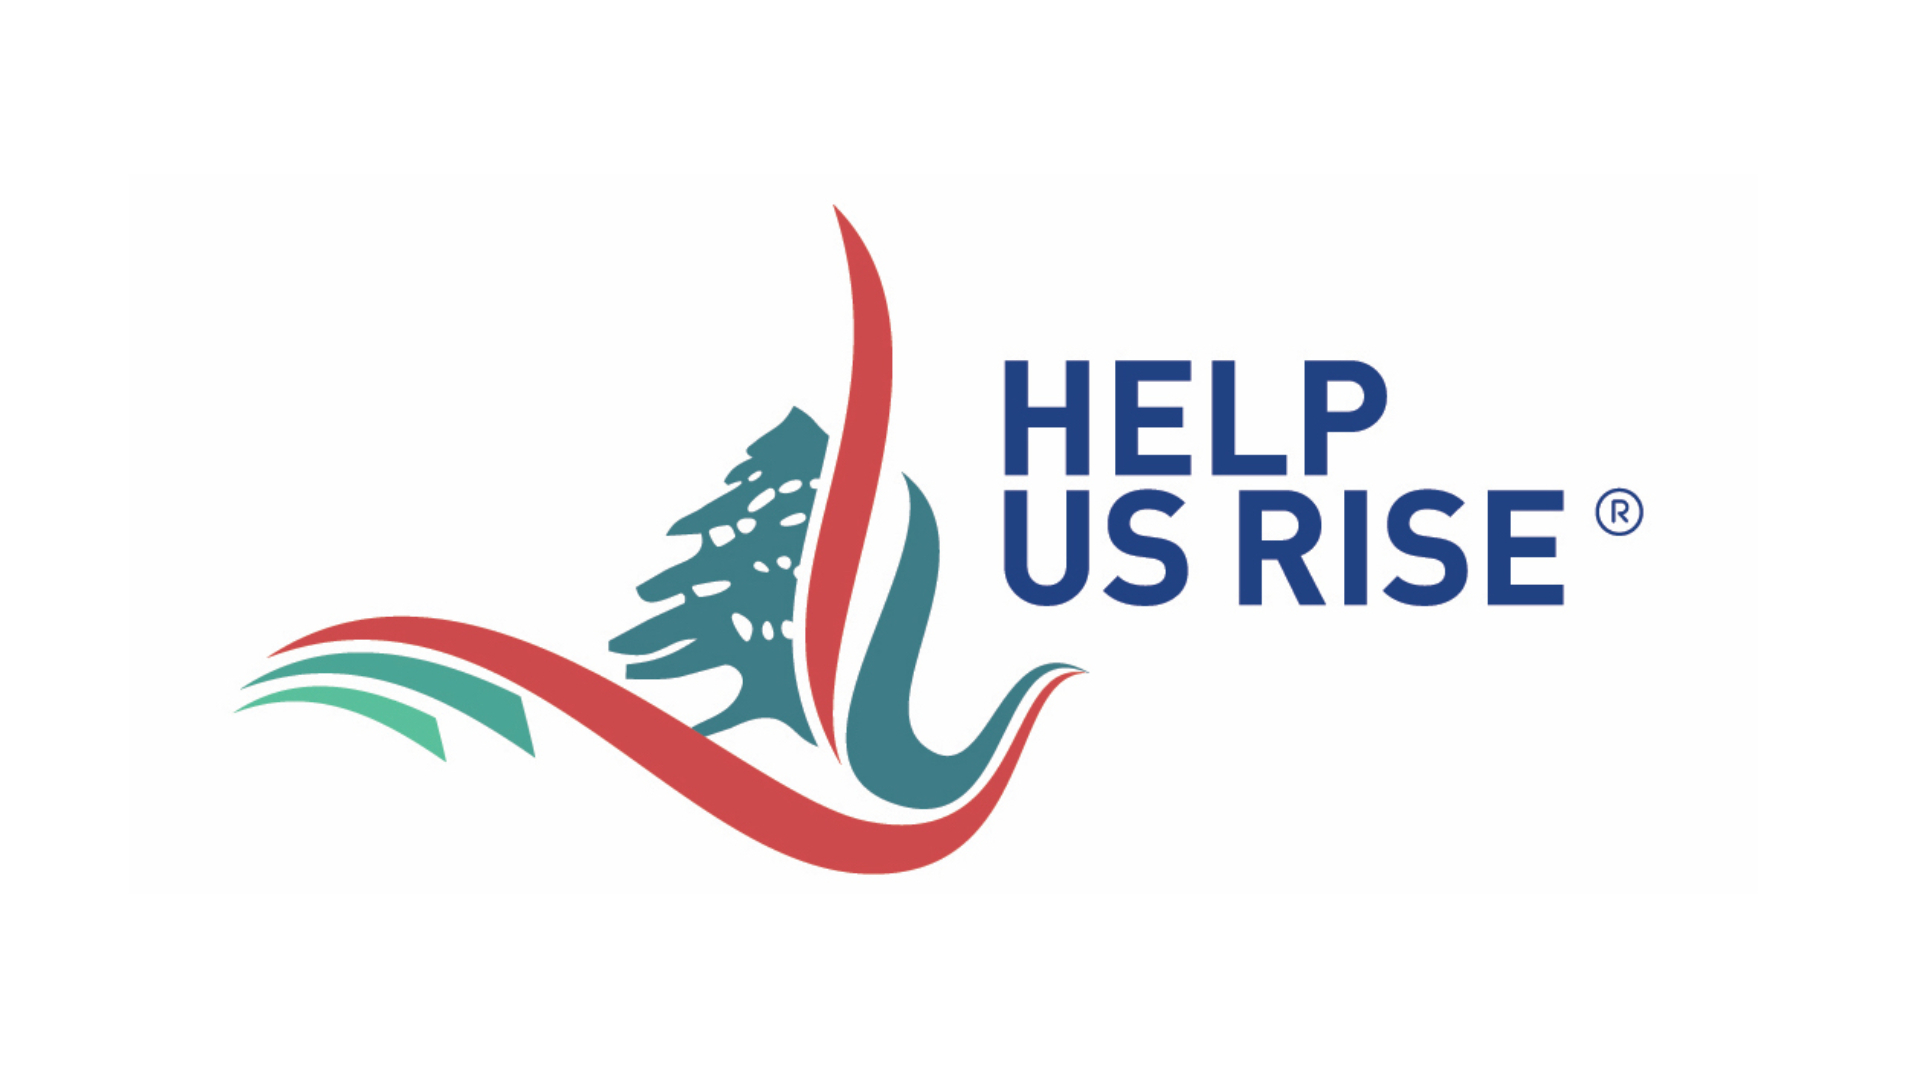 The Help Us Rise initiative helps raise funds for local NGOs in Lebanon